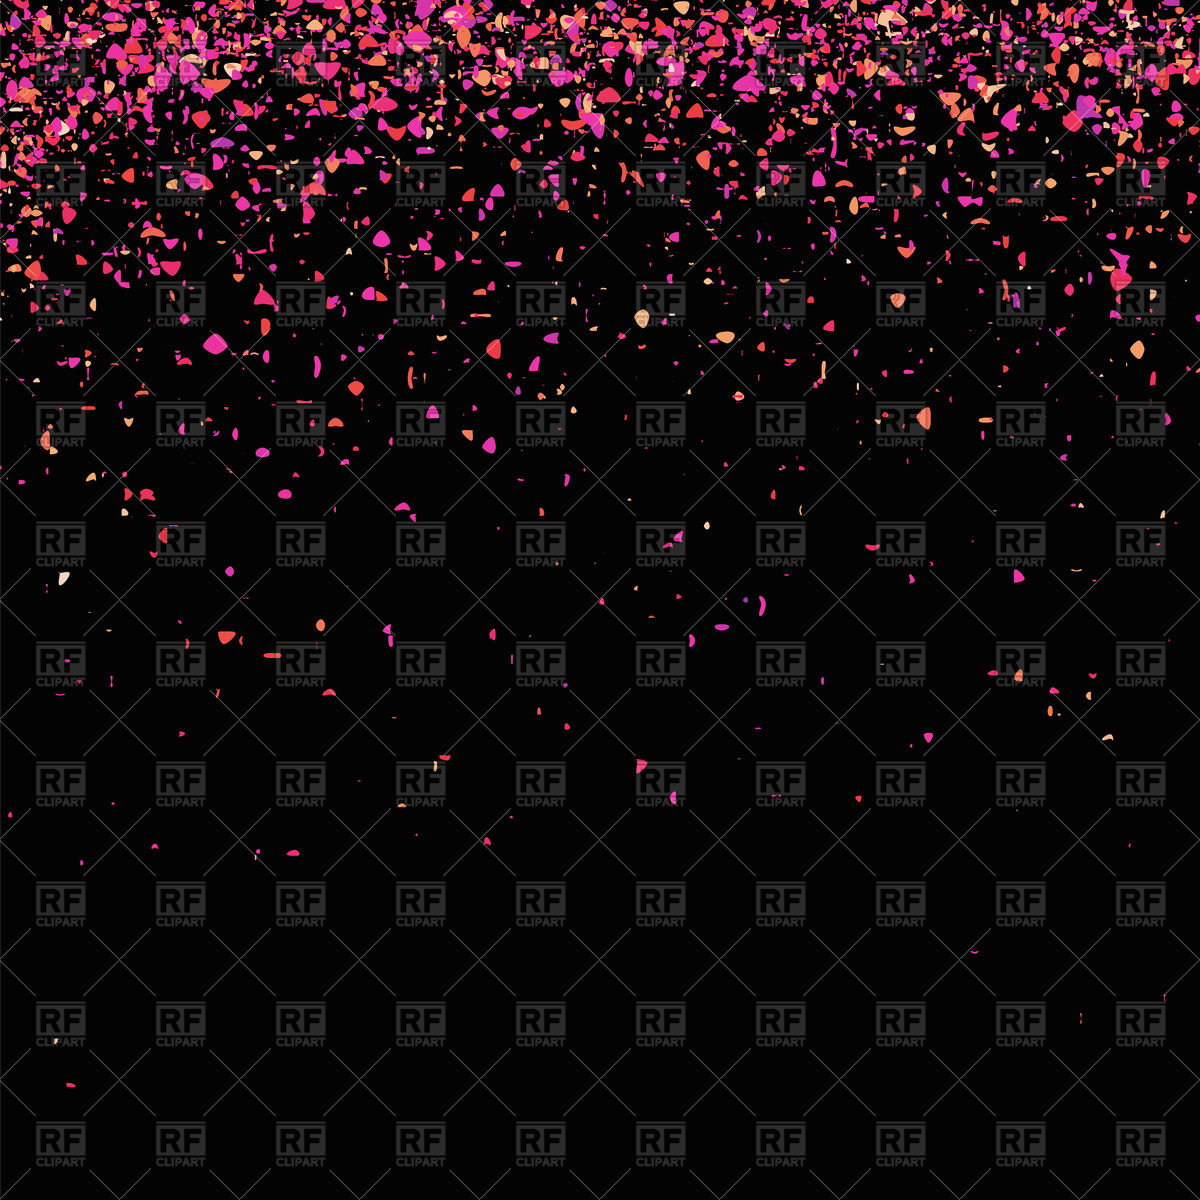 Orange And Pink Confetti On Black Background Vector Image Of